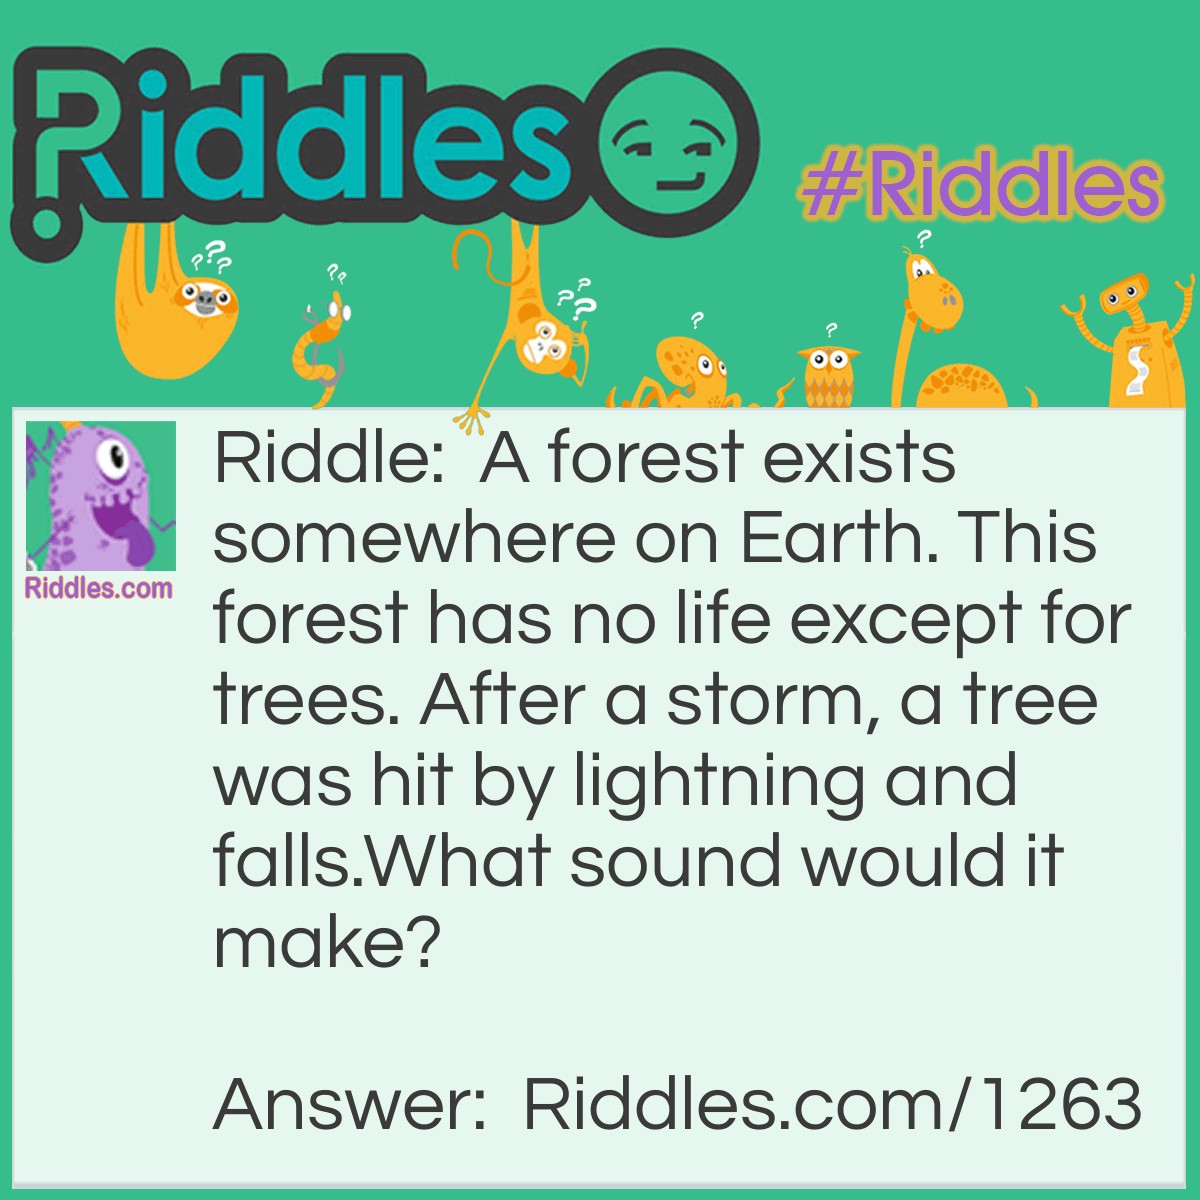 Riddle: A forest exists somewhere on Earth. This forest has no life except for trees. After a storm, a tree was hit by lightning and falls.
What sound would it make? Answer: None. Sound does not exist if it is unheard.